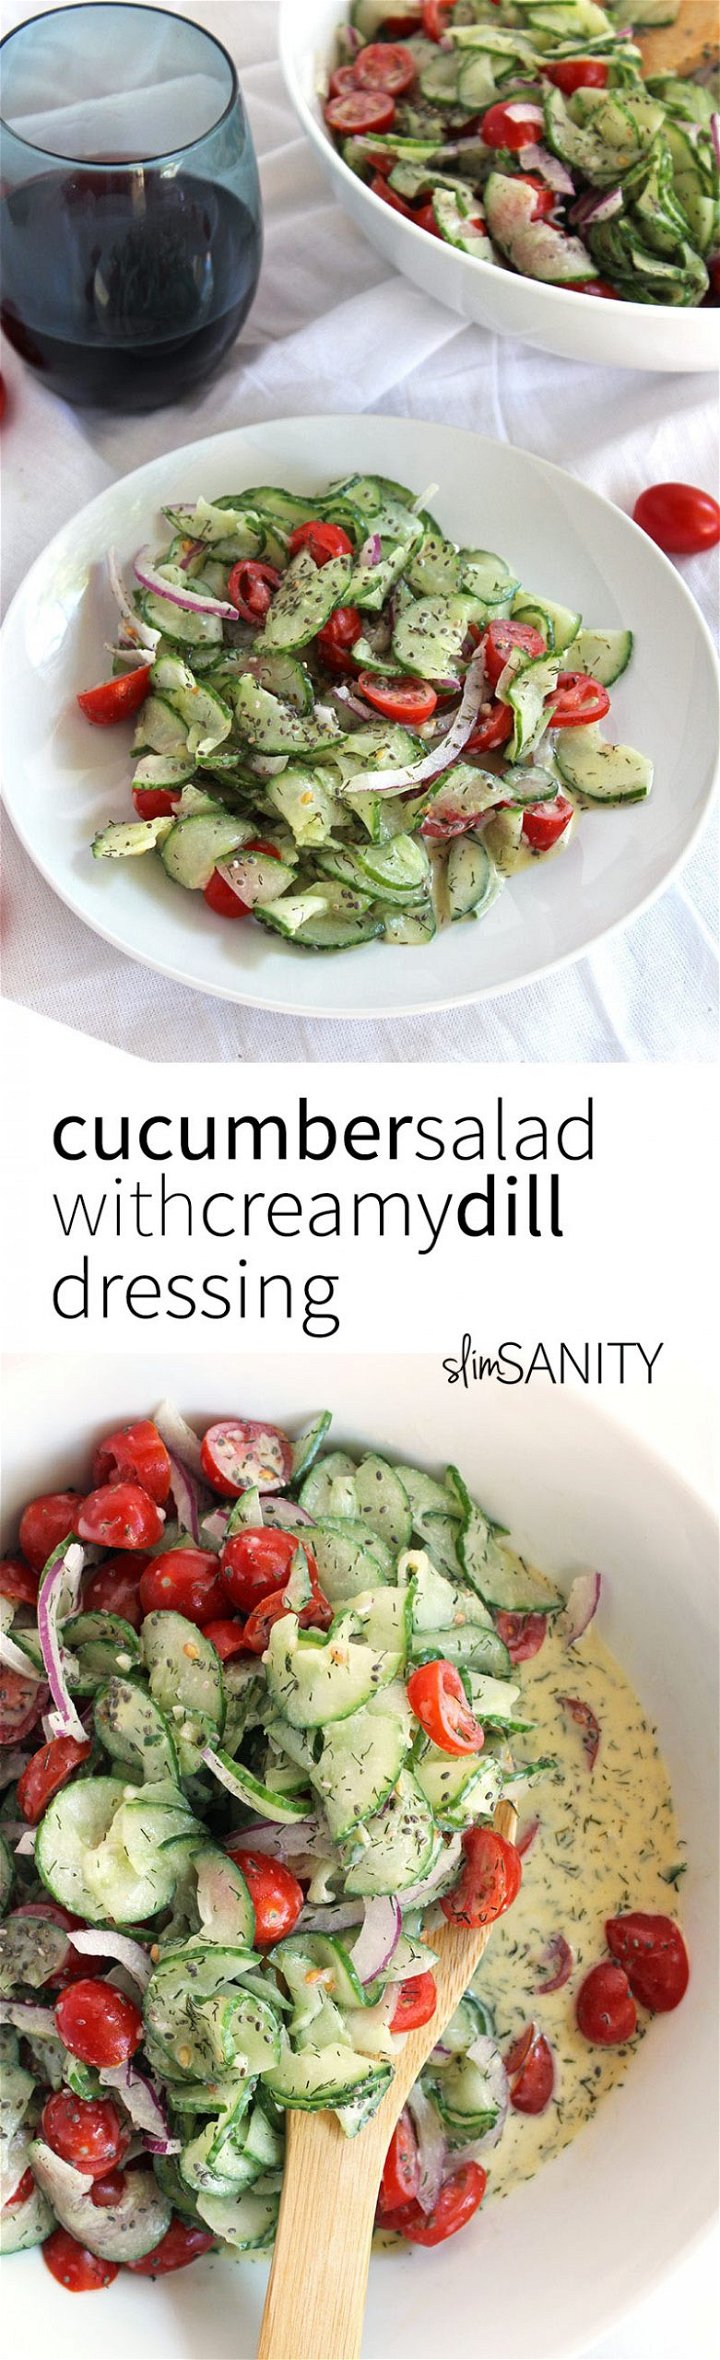 cucumber salad with creamy dill dressing 7